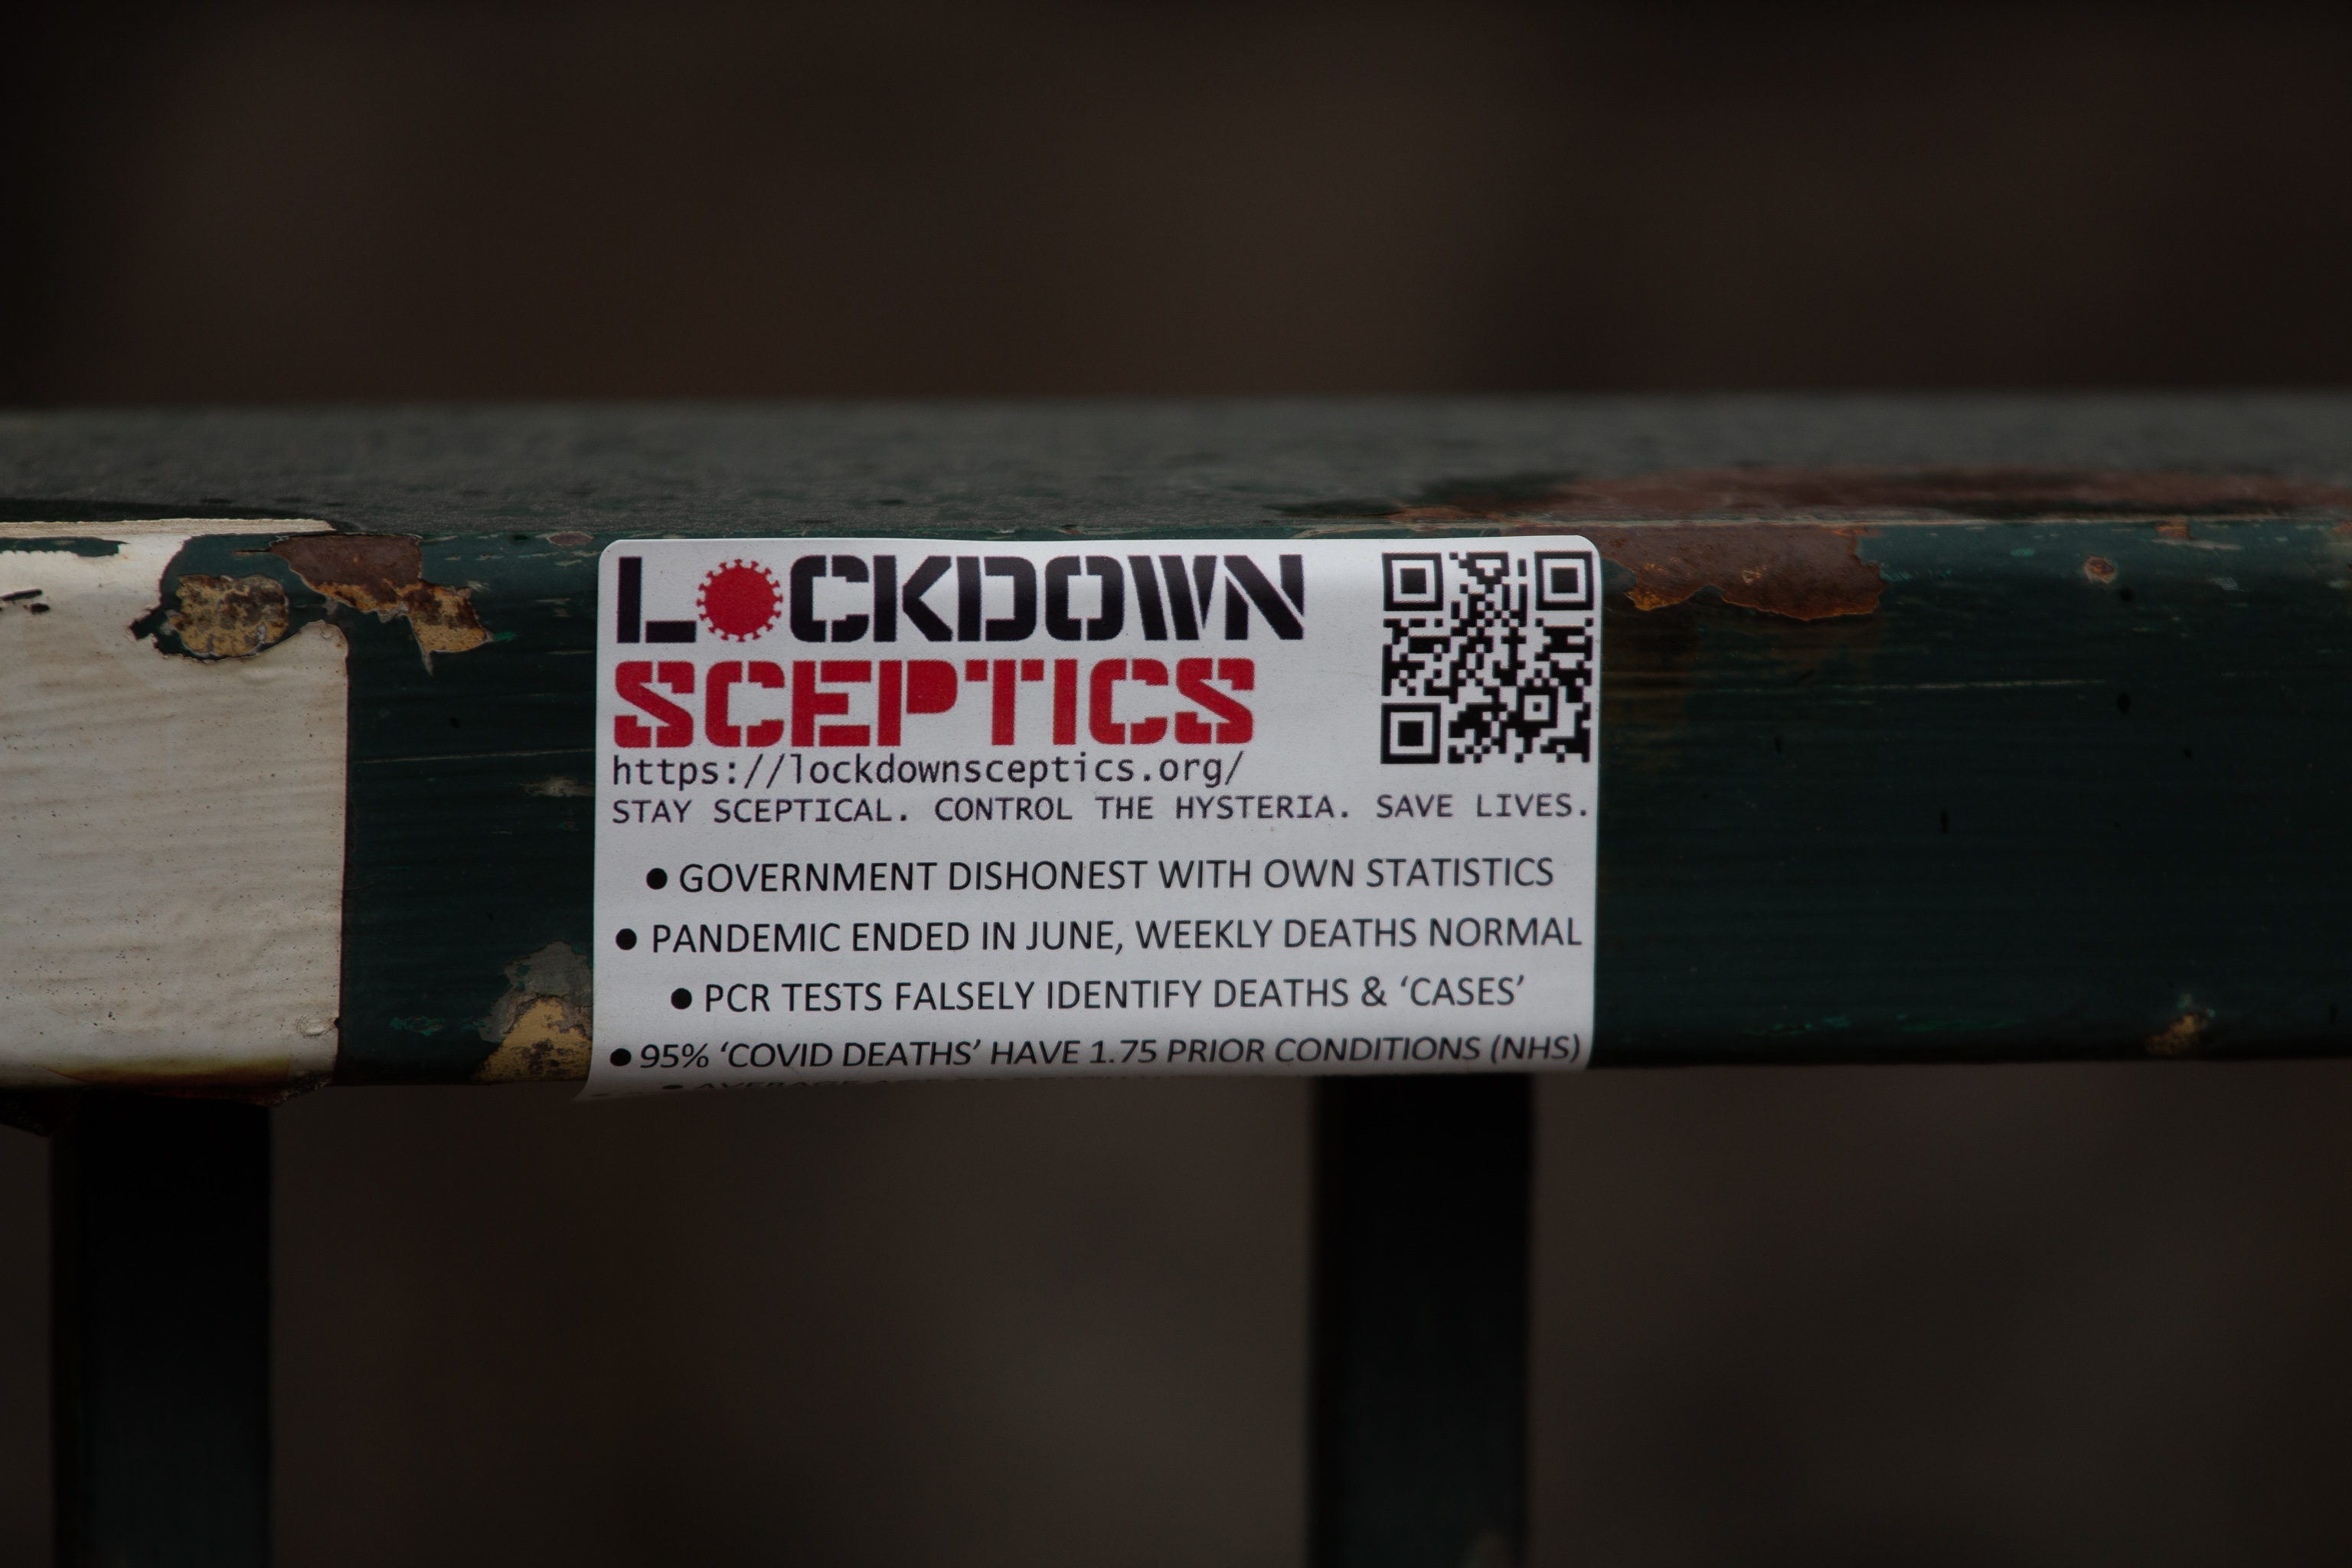 Lockdown Sceptics
You'll forgive me if I don't get my factual information on the pandemic from stickers on railings.

The latest Public Health England information sh...